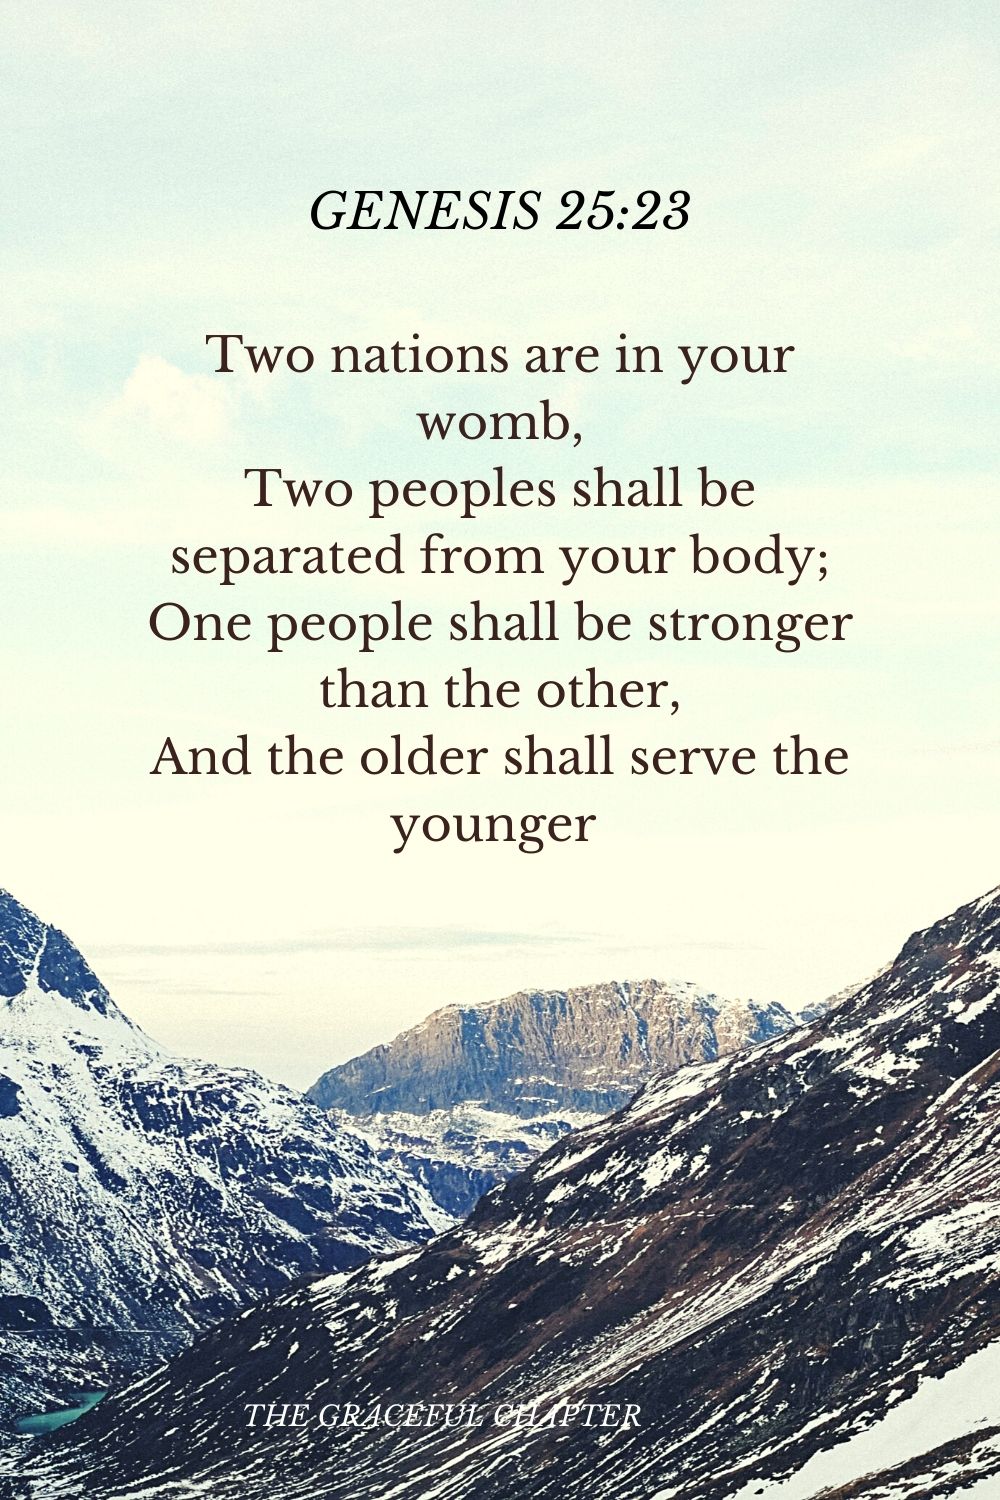 Two nations are in your womb, Two peoples shall be separated from your body; One people shall be stronger than the other, And the older shall serve the younger  Genesis 25:23